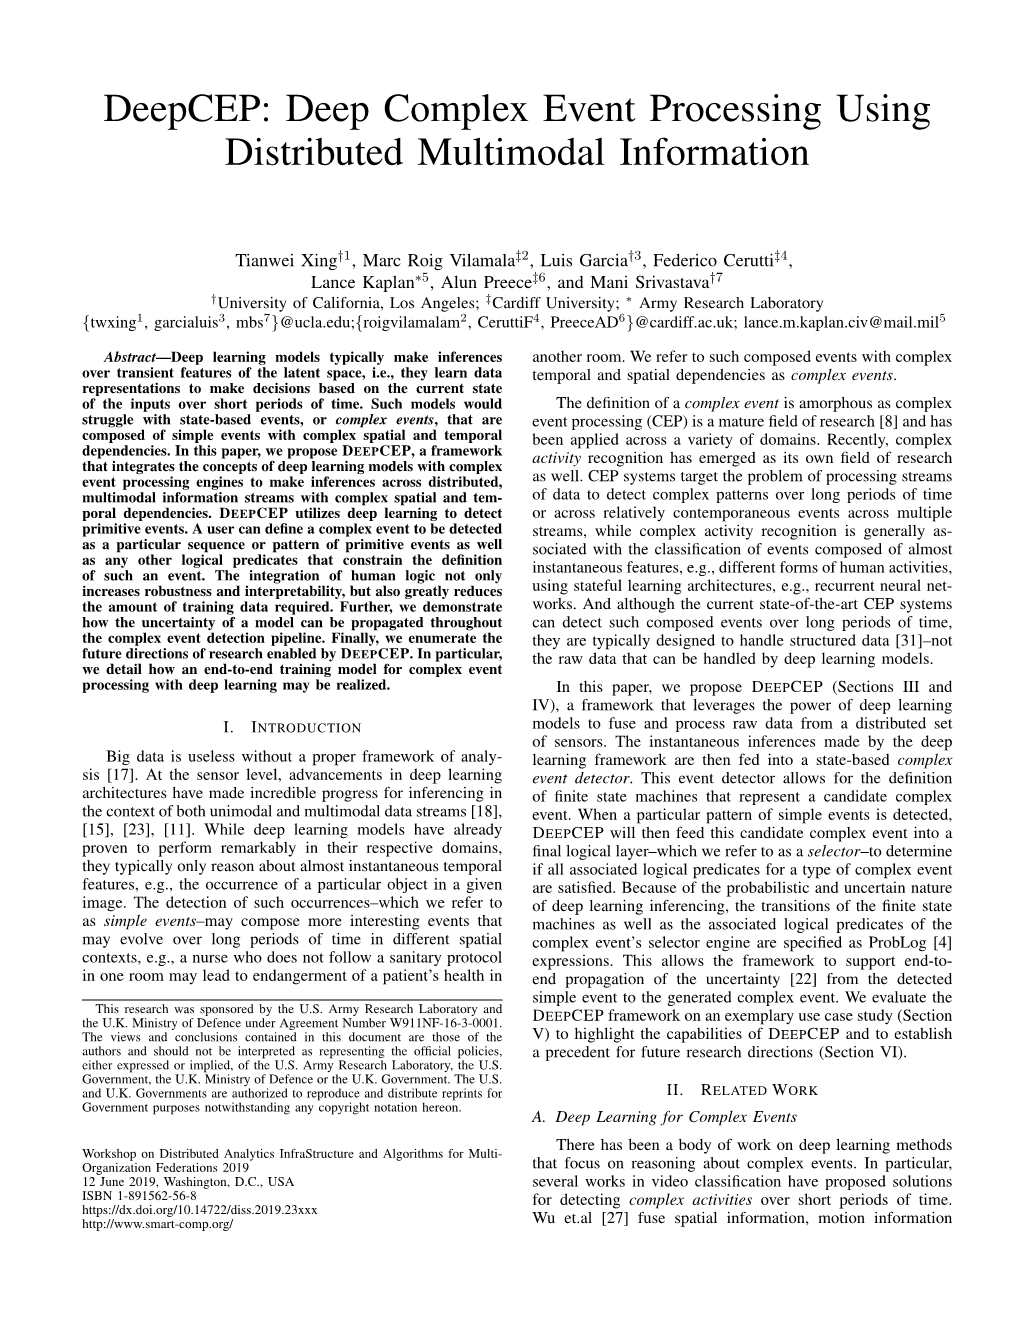 Deep Complex Event Processing Using Distributed Multimodal Information